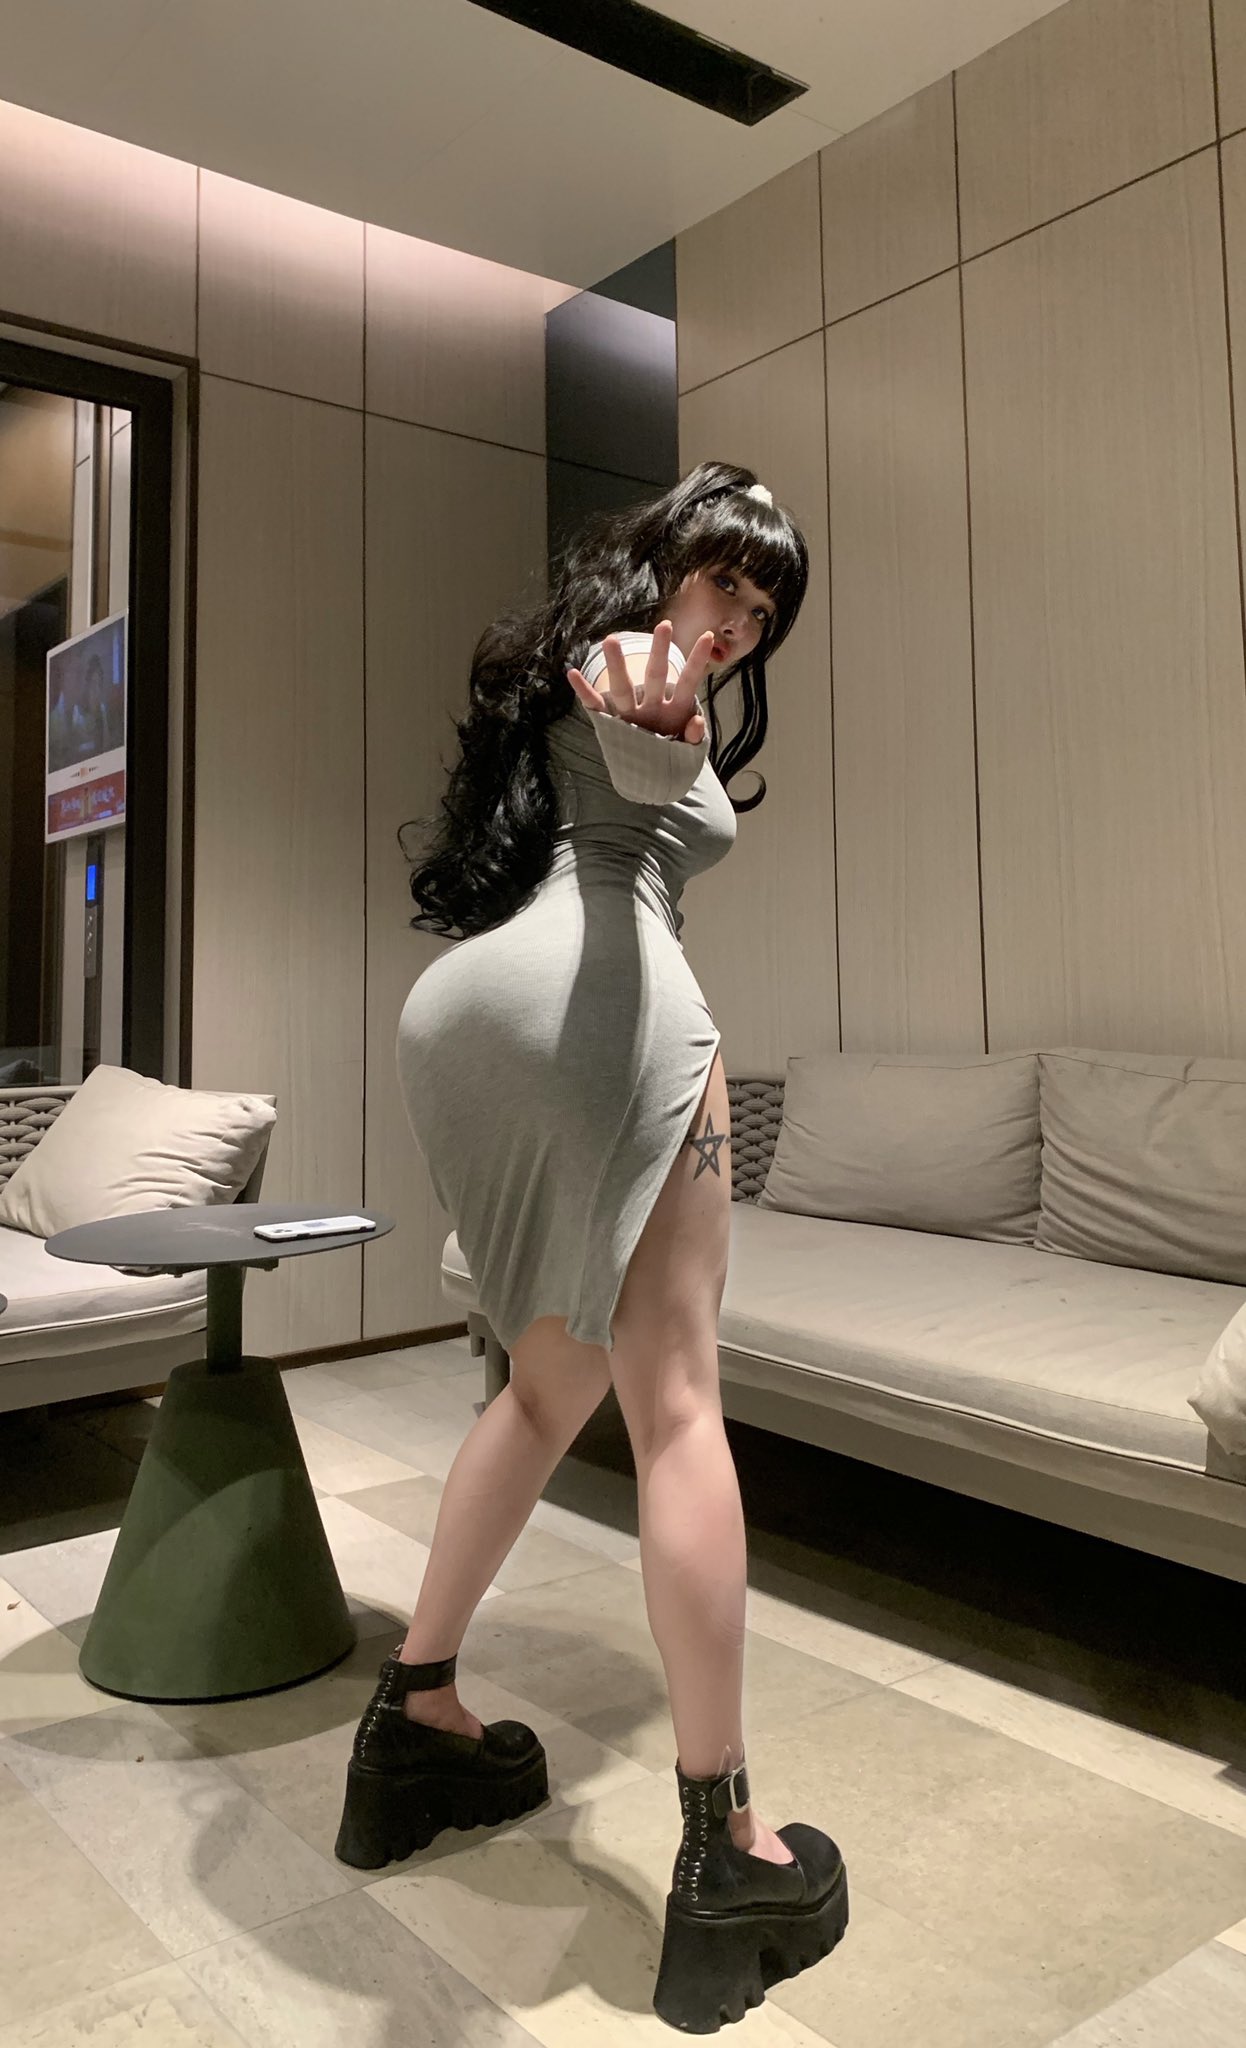 Songyuxin Hitomi, a Curvy and Hot Fitness Beauty from China